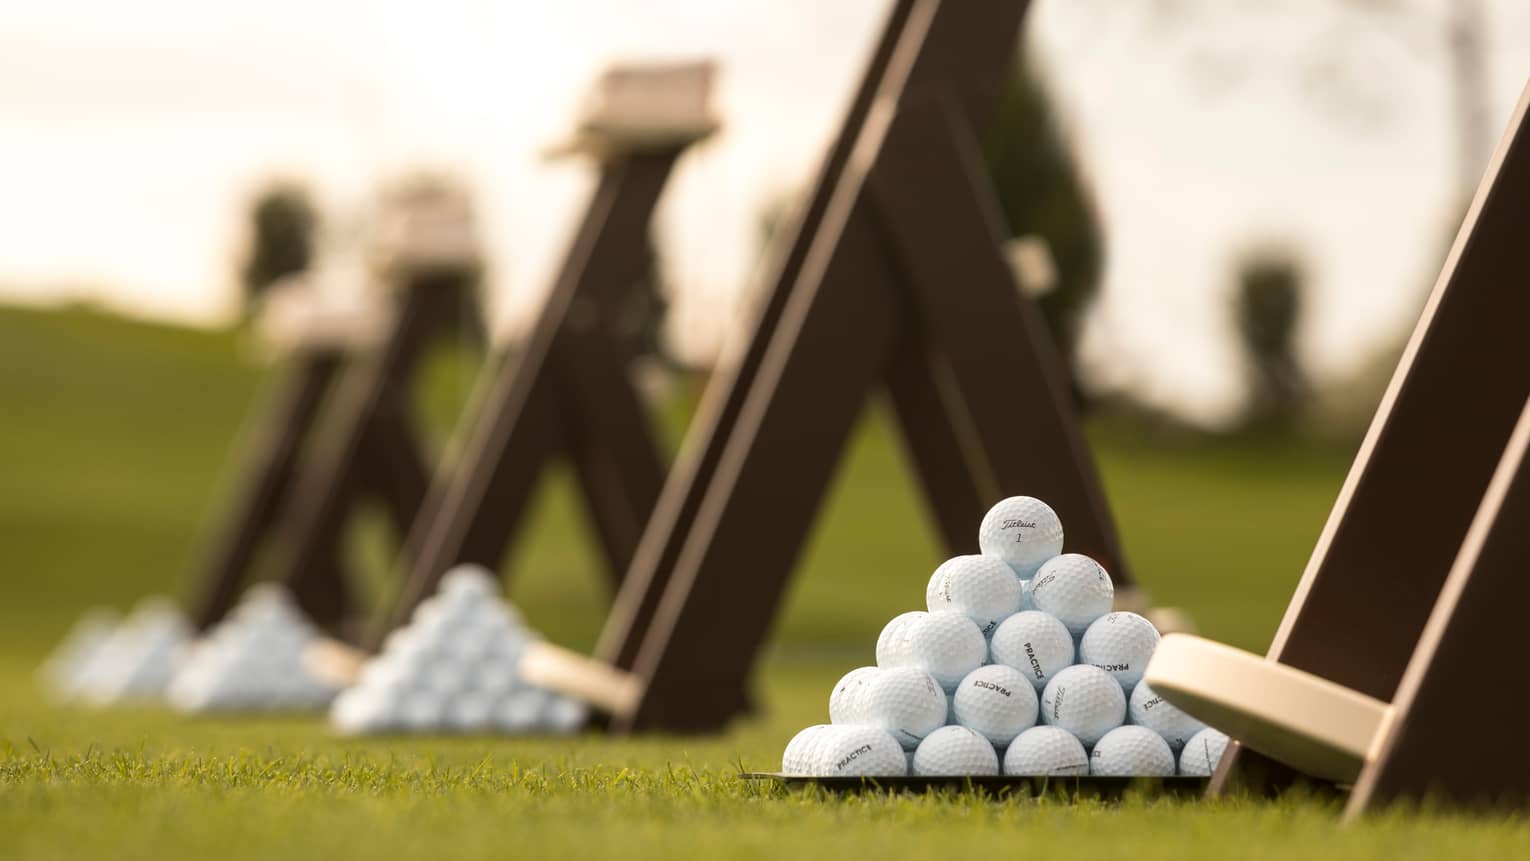 Stacks of white golf balls on lawn in front of wood panels